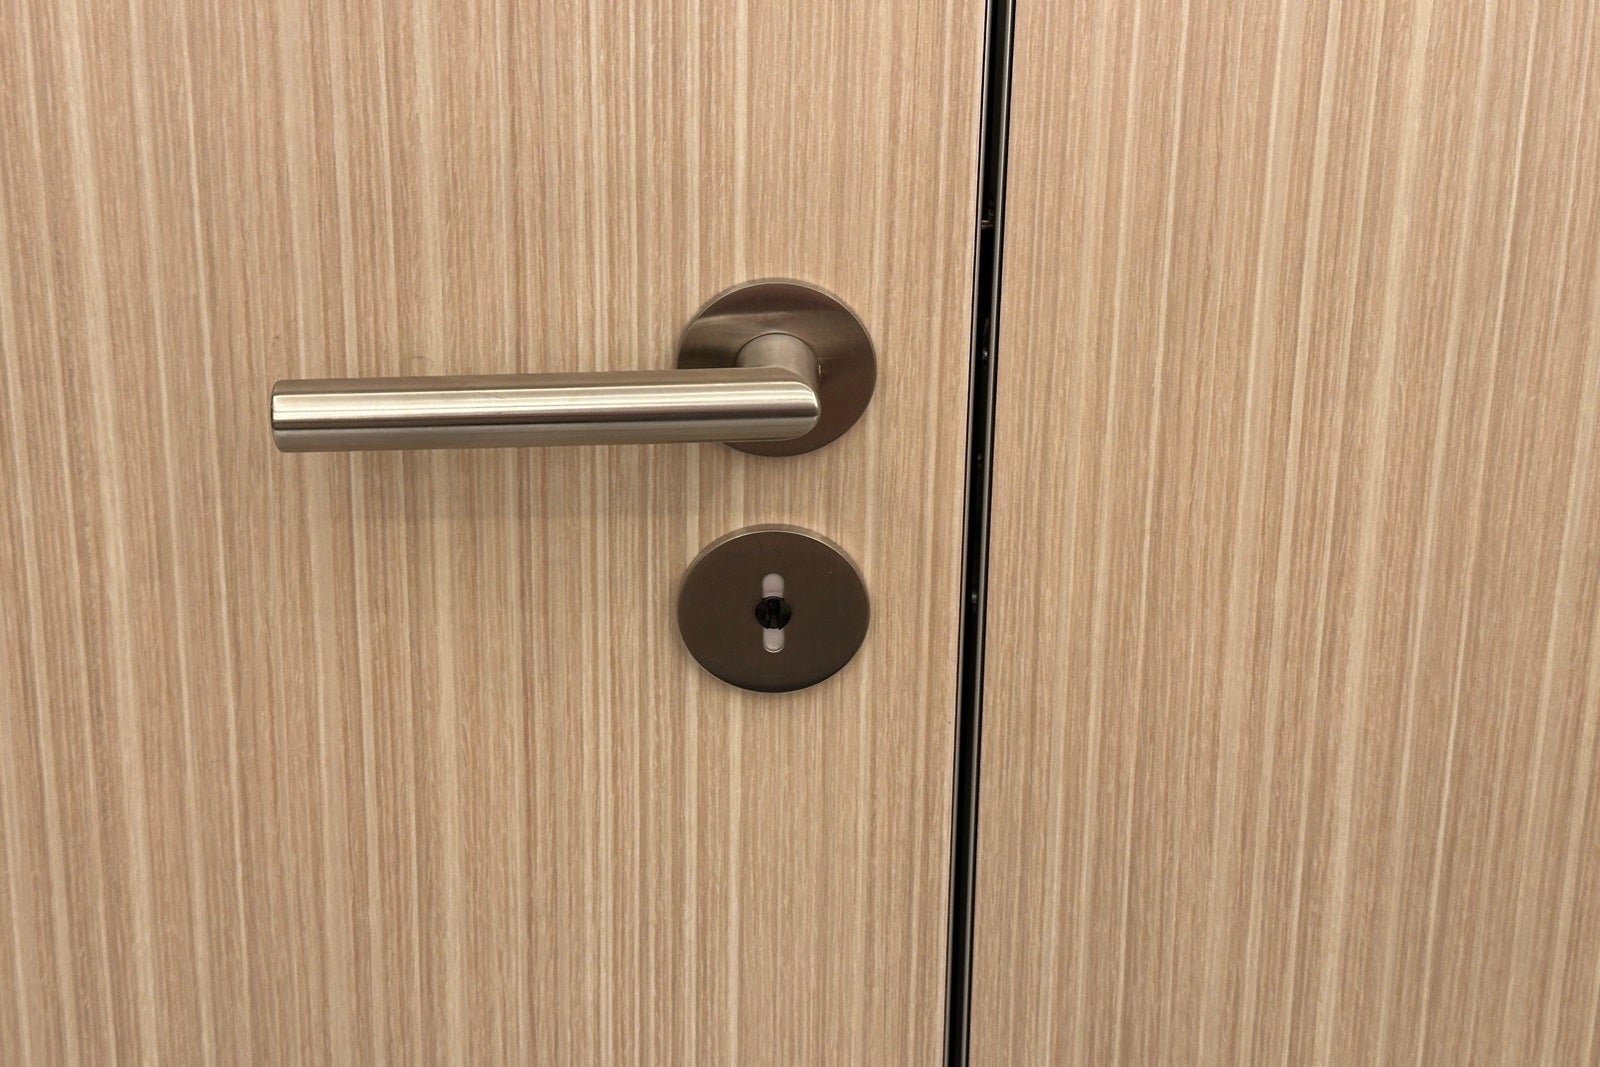 A bathroom stall door handle showing white for unoccupied